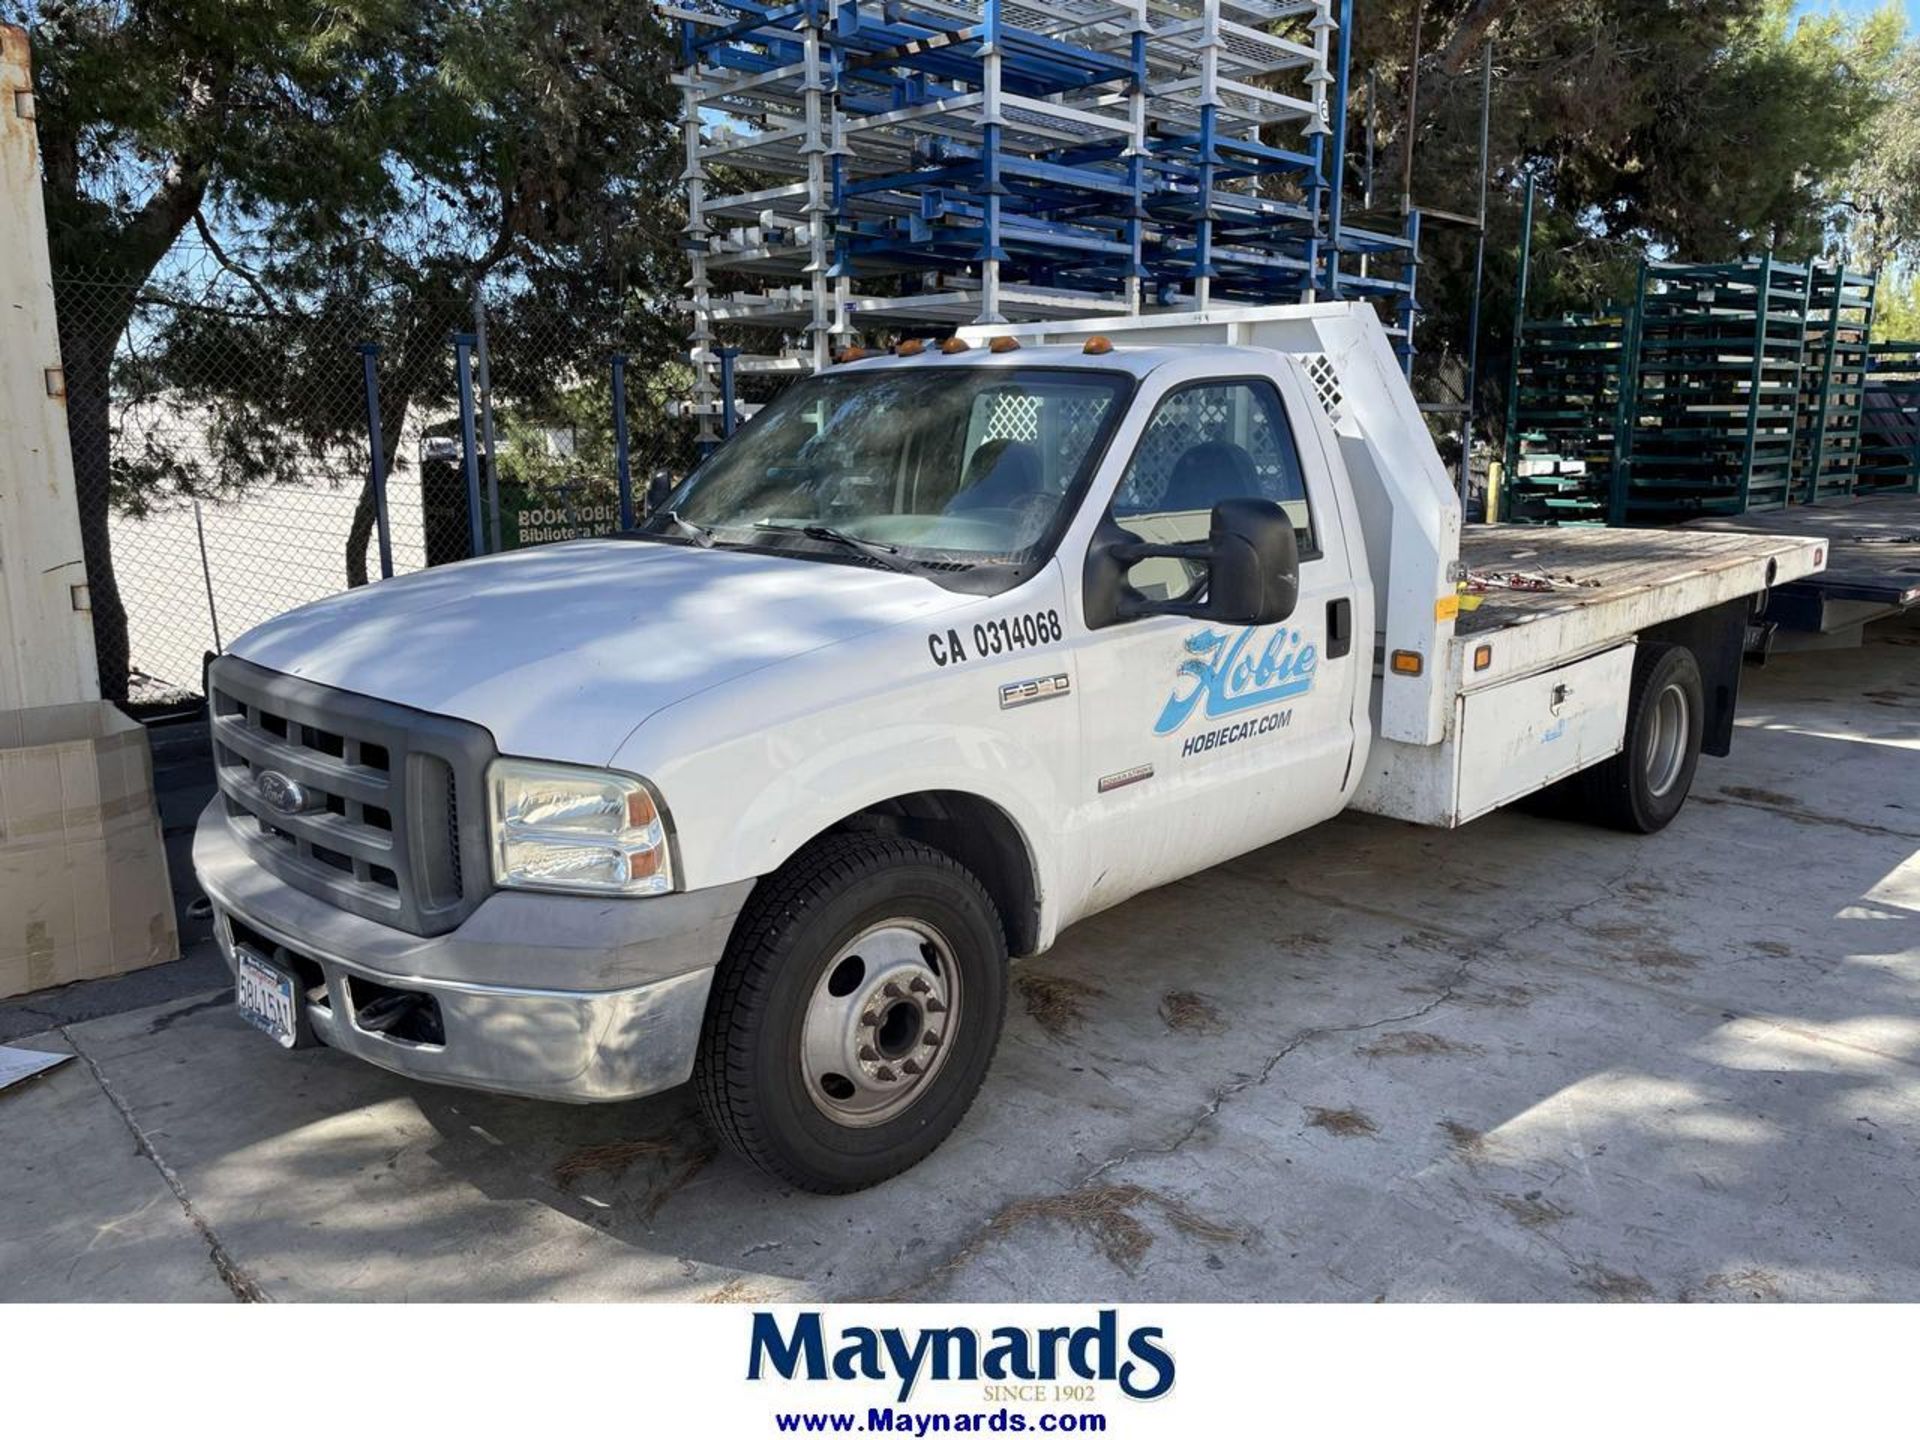 2005 Ford F-350 XL Super Duty 12' Stake Bed Truck